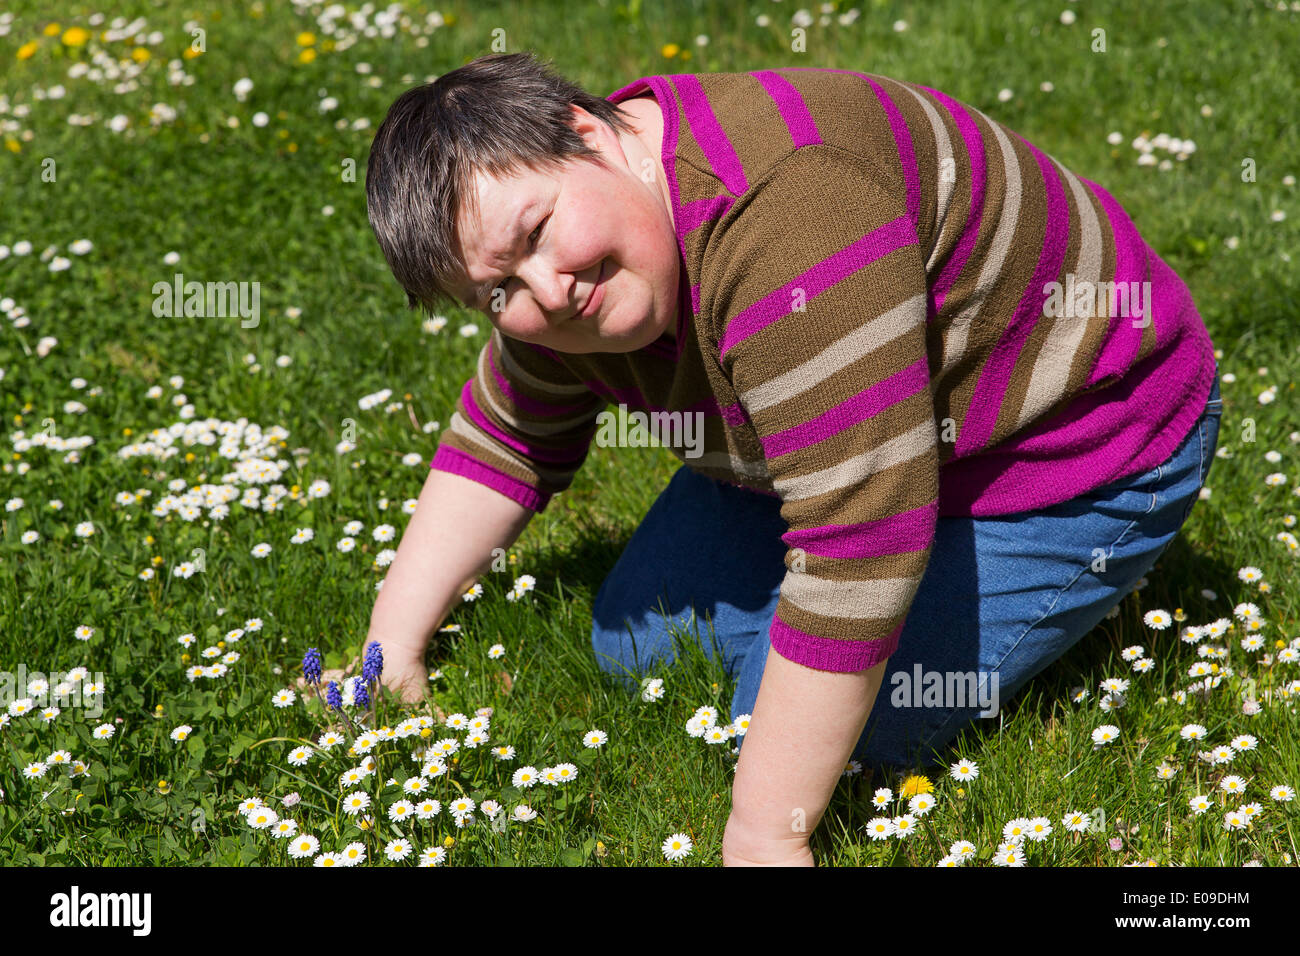 mentally disabled woman on a meadow Stock Photo